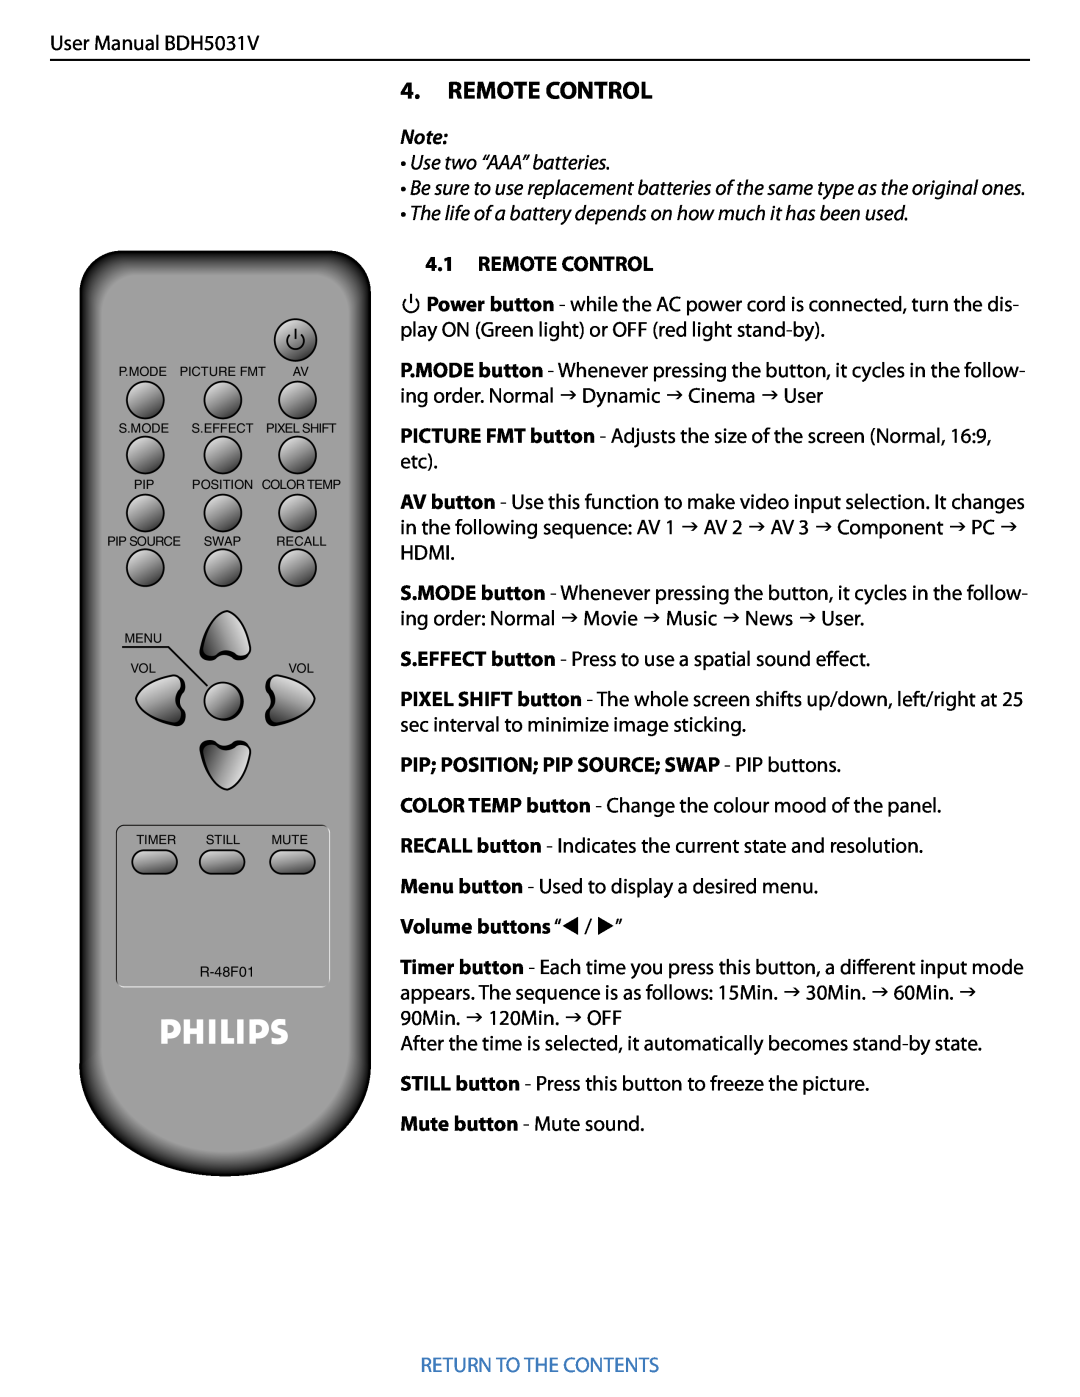 Philips BDH5031V.00 user manual Remote Control, PIP POSITION PIP SOURCE SWAP - PIP buttons, Volume buttons “ / ” 